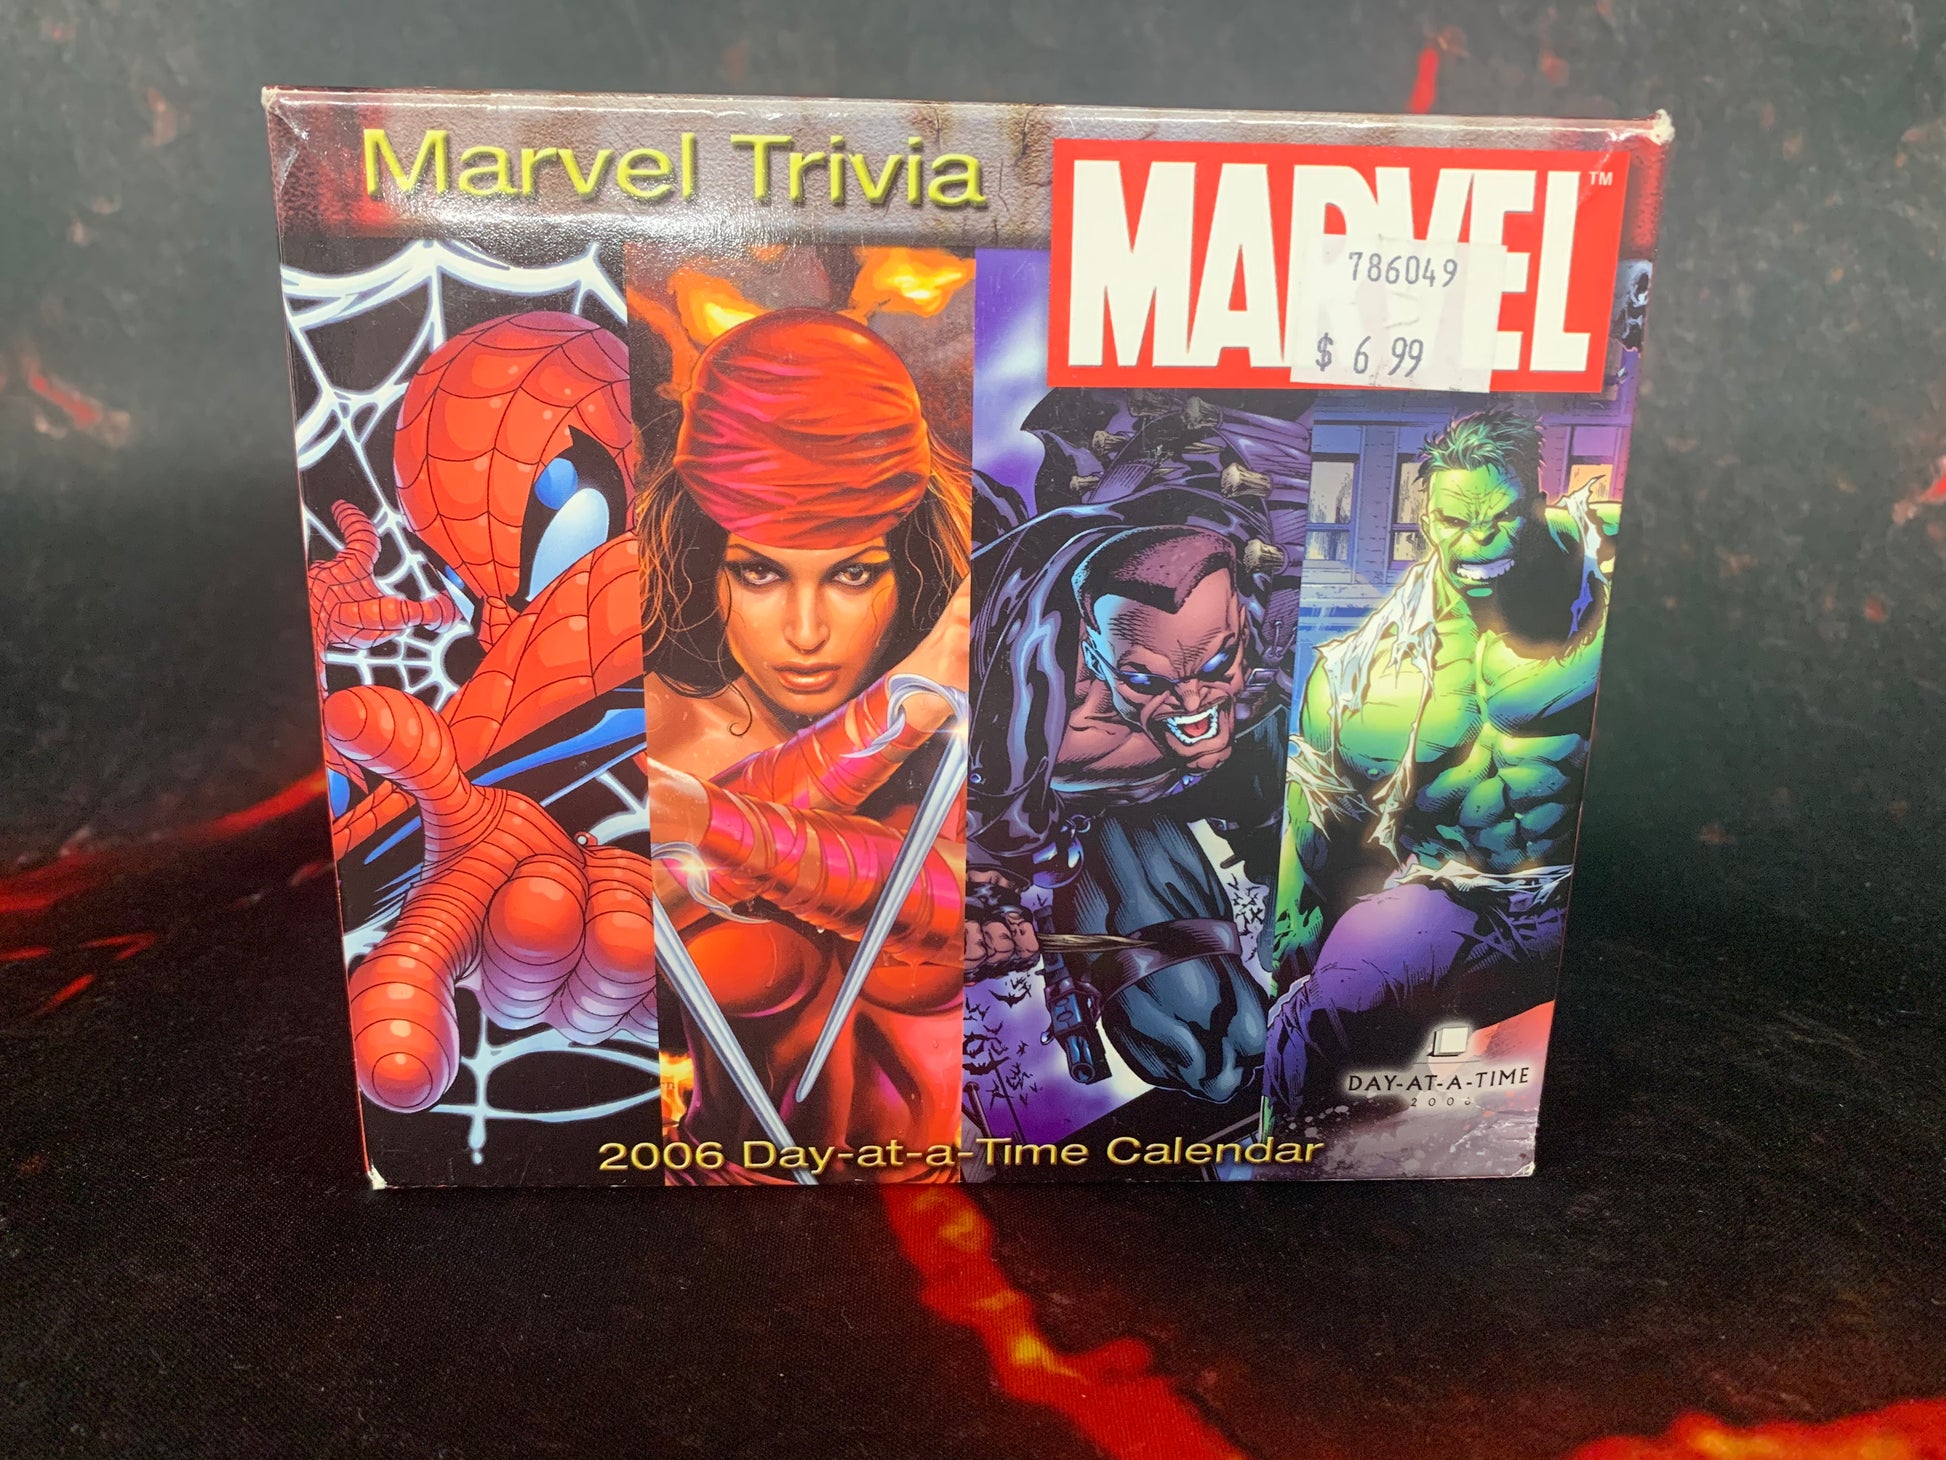 Marvel Trivia 2006 Day-At-A-Time Calendar - Action Figure - The Hooded Goblin